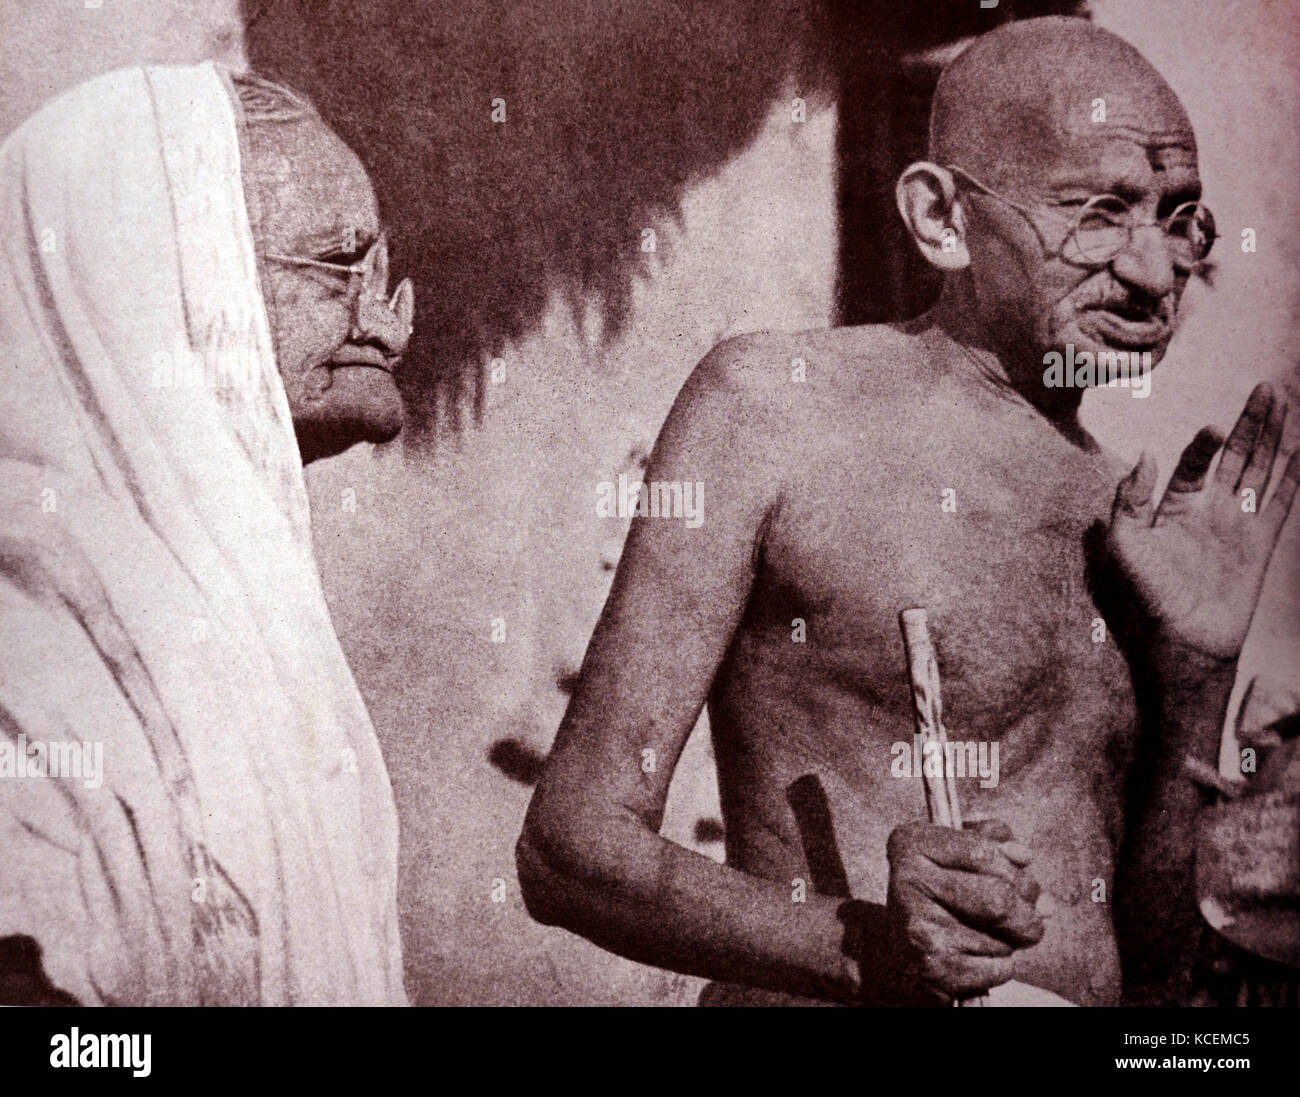 Mahatma Gandhi and his wife Kasturba, at Sevagram a village in the state of Maharashtra, India. Sevagram was the place of Mohandas Gandhi's ashram and his residence from 1936 to his death in 1948 Stock Photo